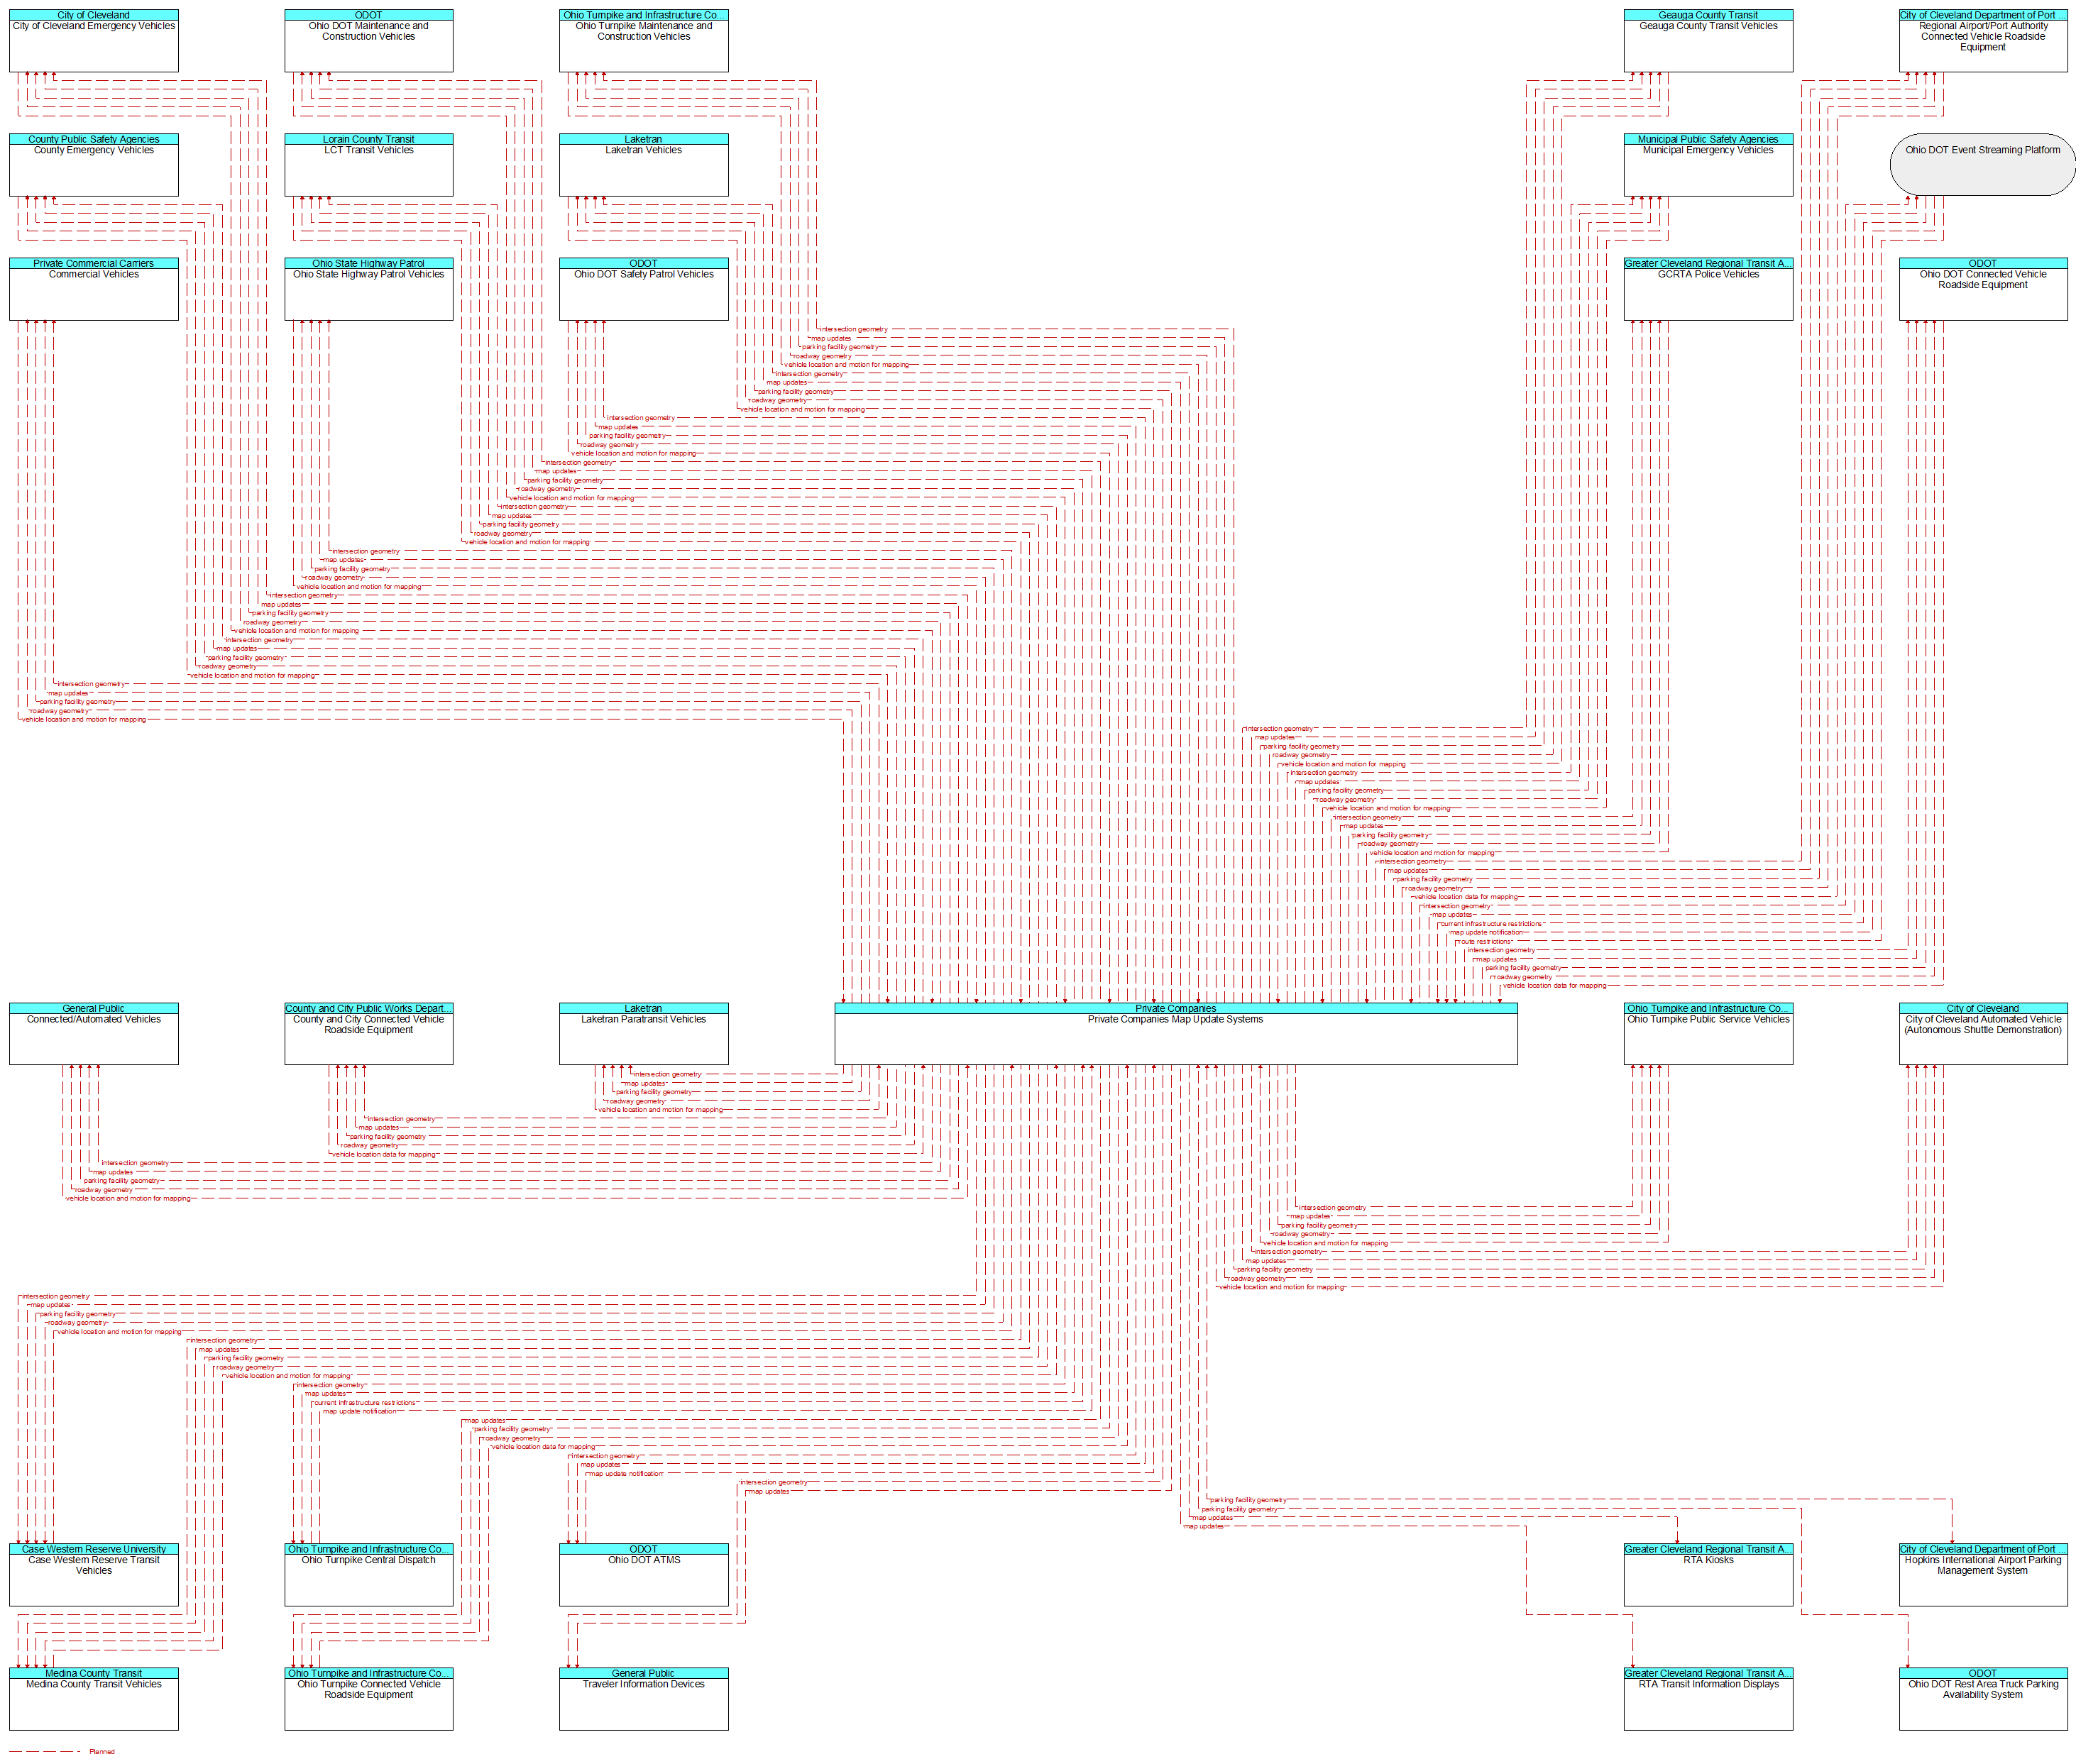 Context Diagram - Private Companies Map Update Systems